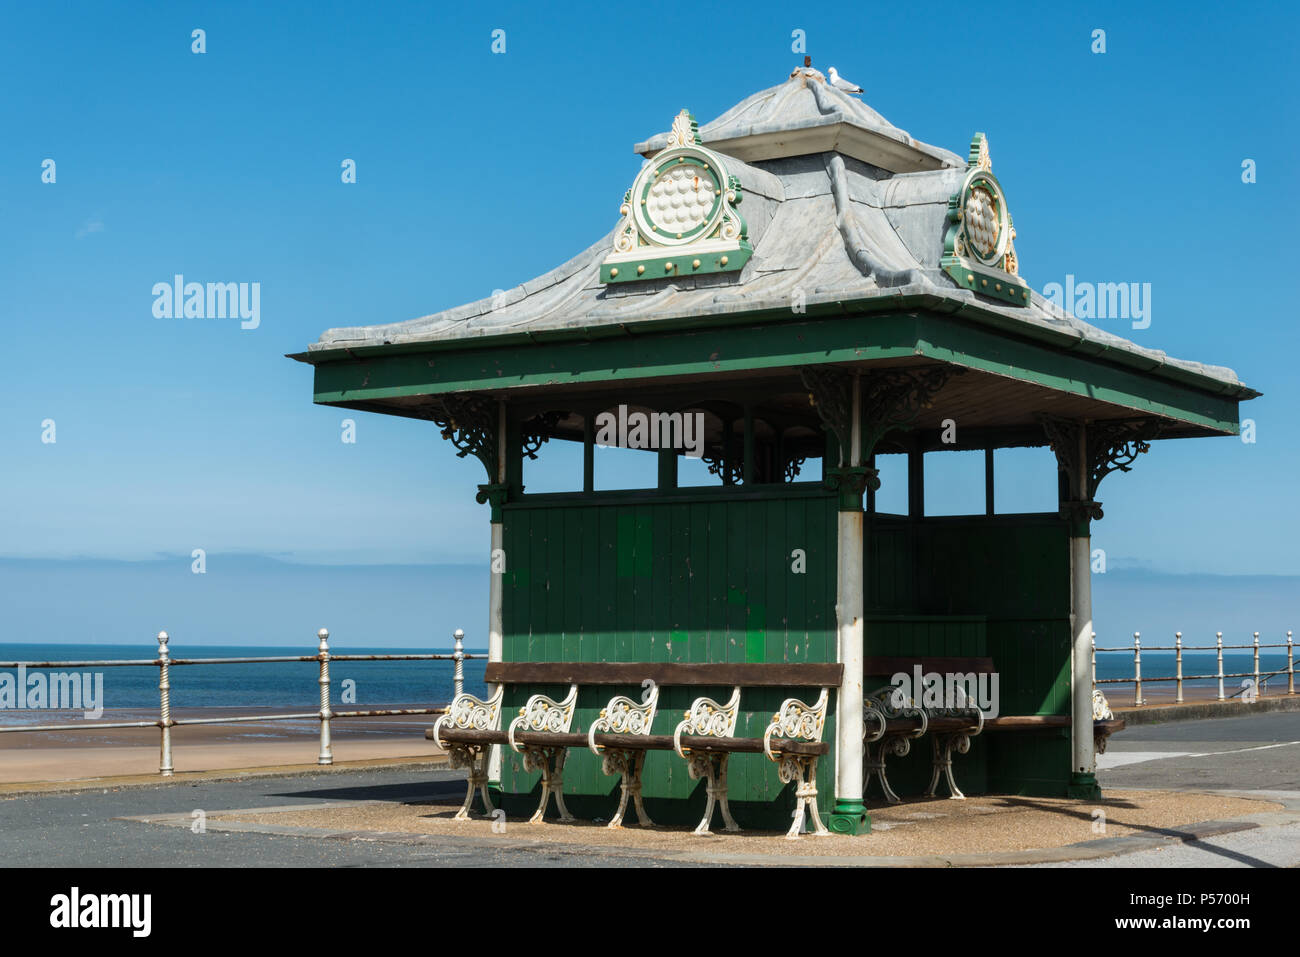 Historical green coastal shelters with benches on the promenade of the tourist resort of Blackpool, Lancashire, England, UK Stock Photo